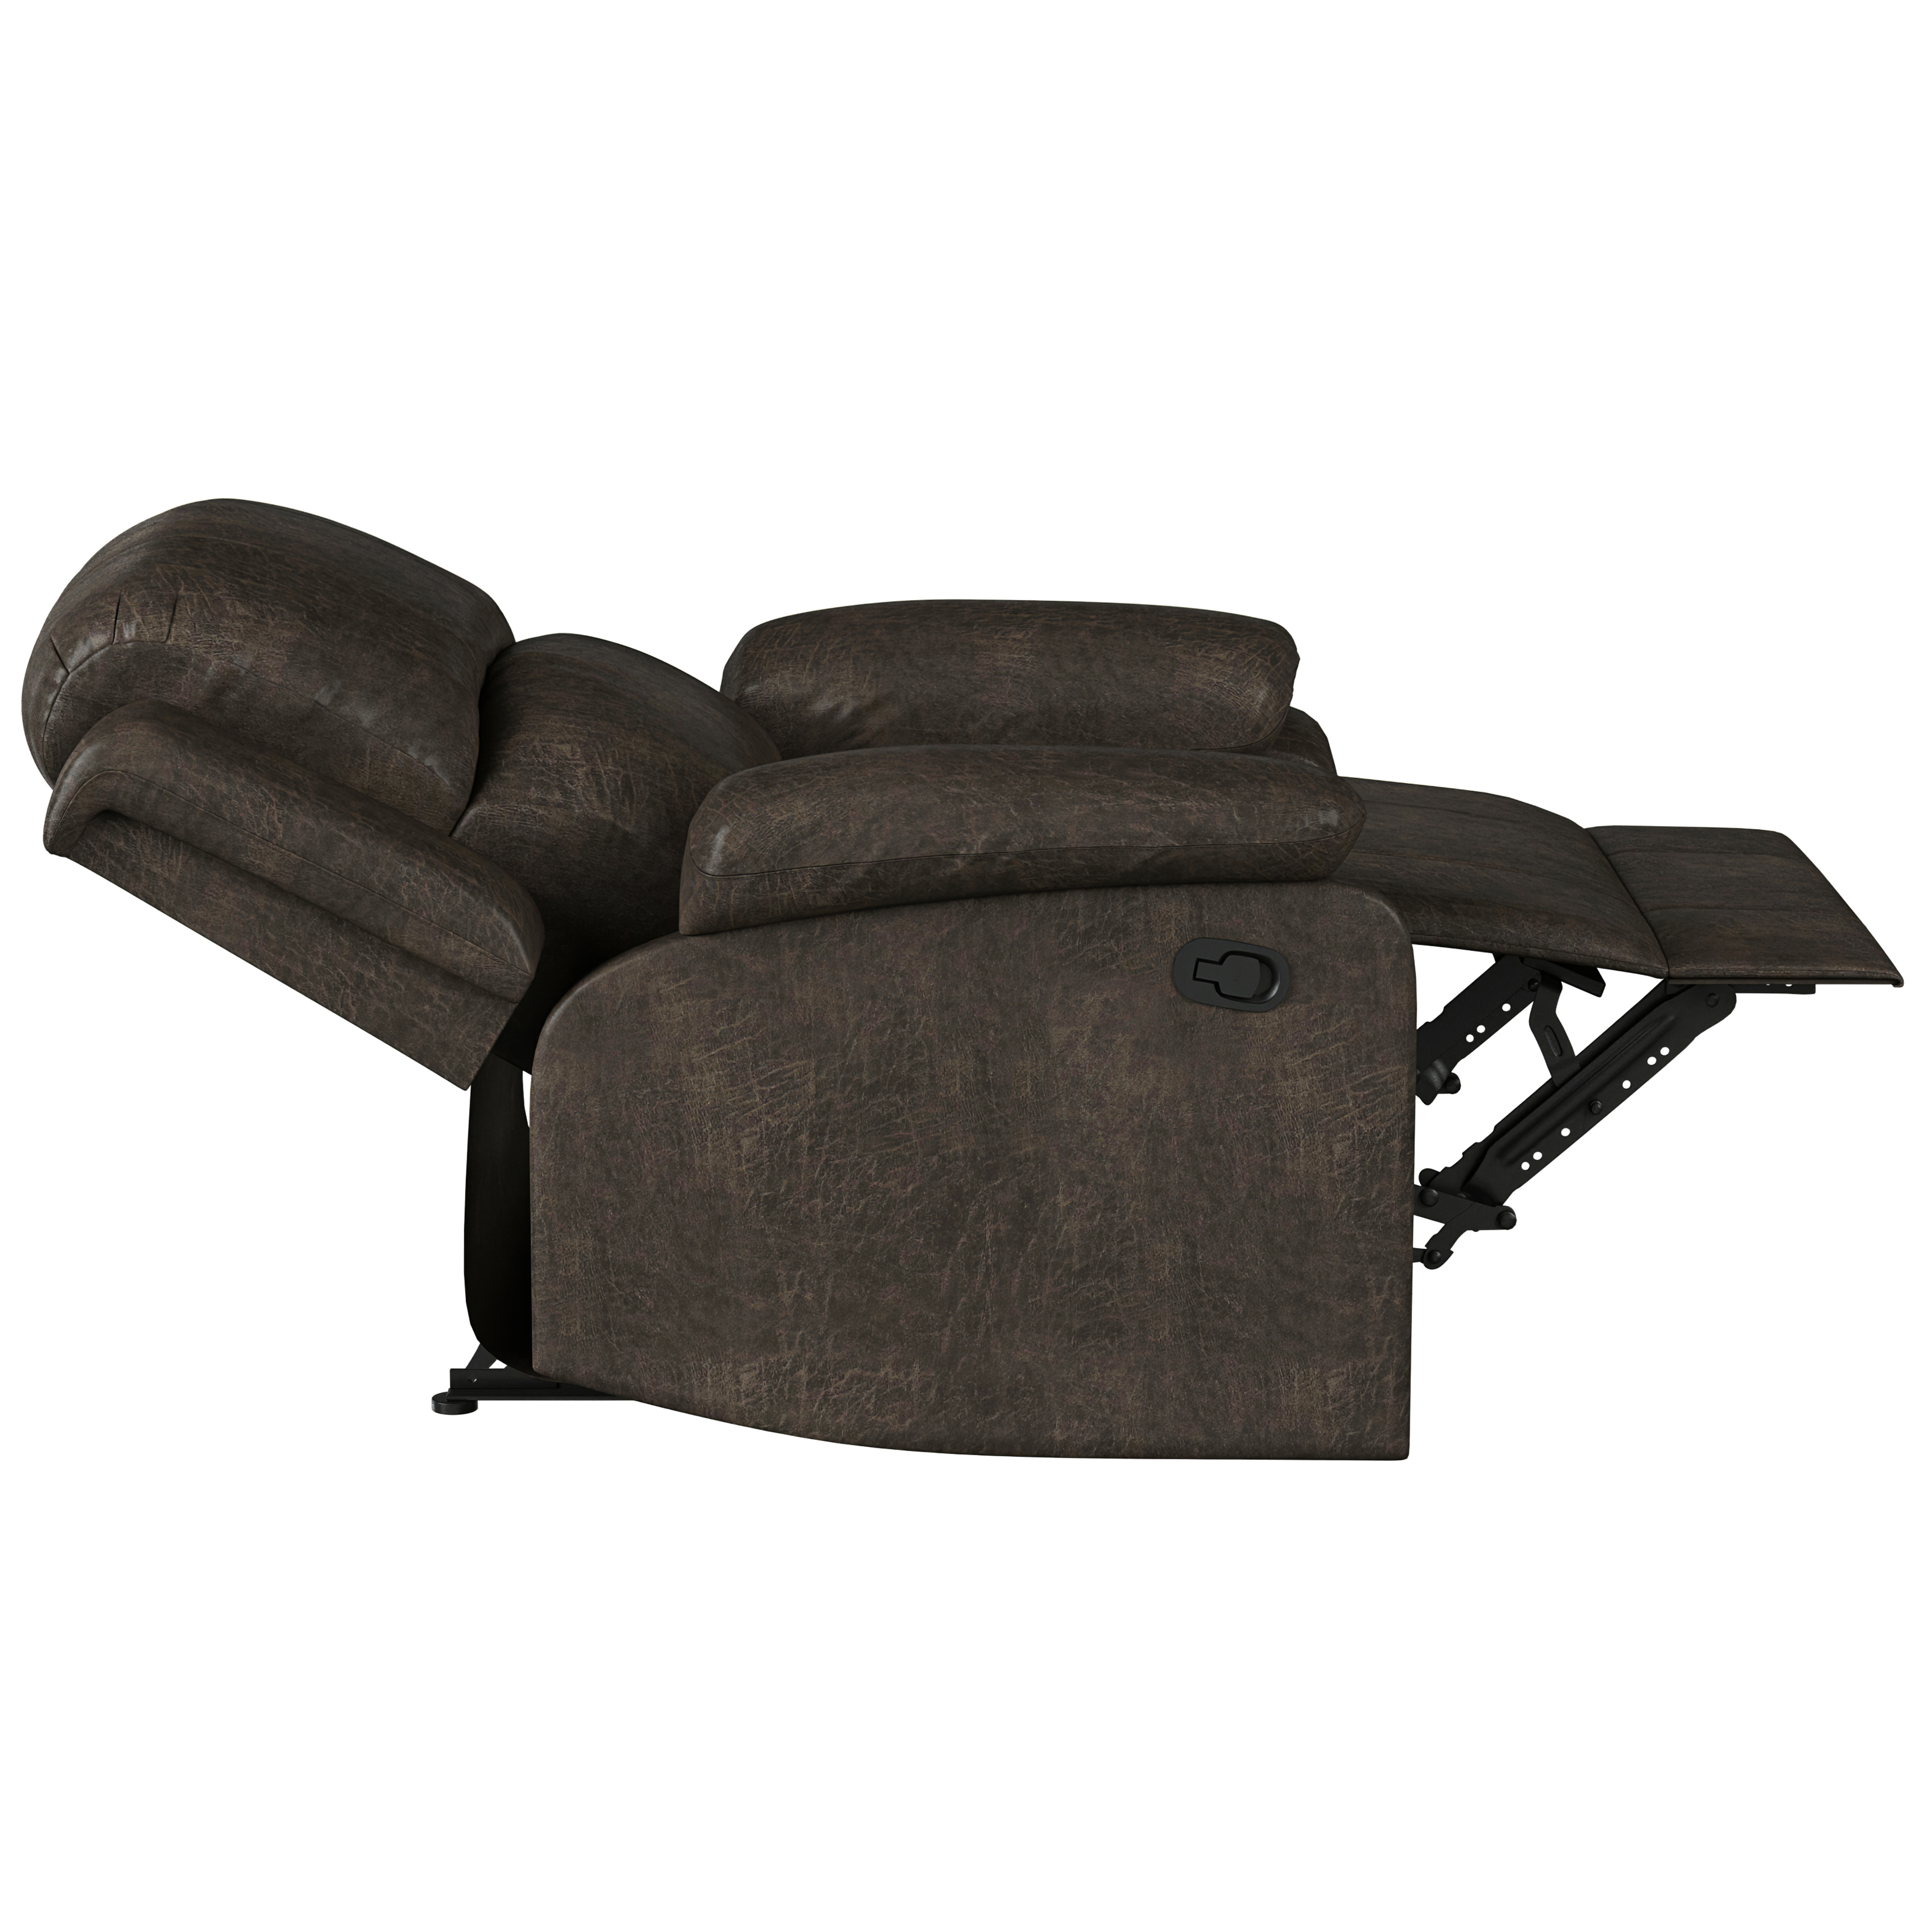 Relax-a-Lounger Reynolds Manual Standard Recliner, Brown Faux Suede - image 4 of 13